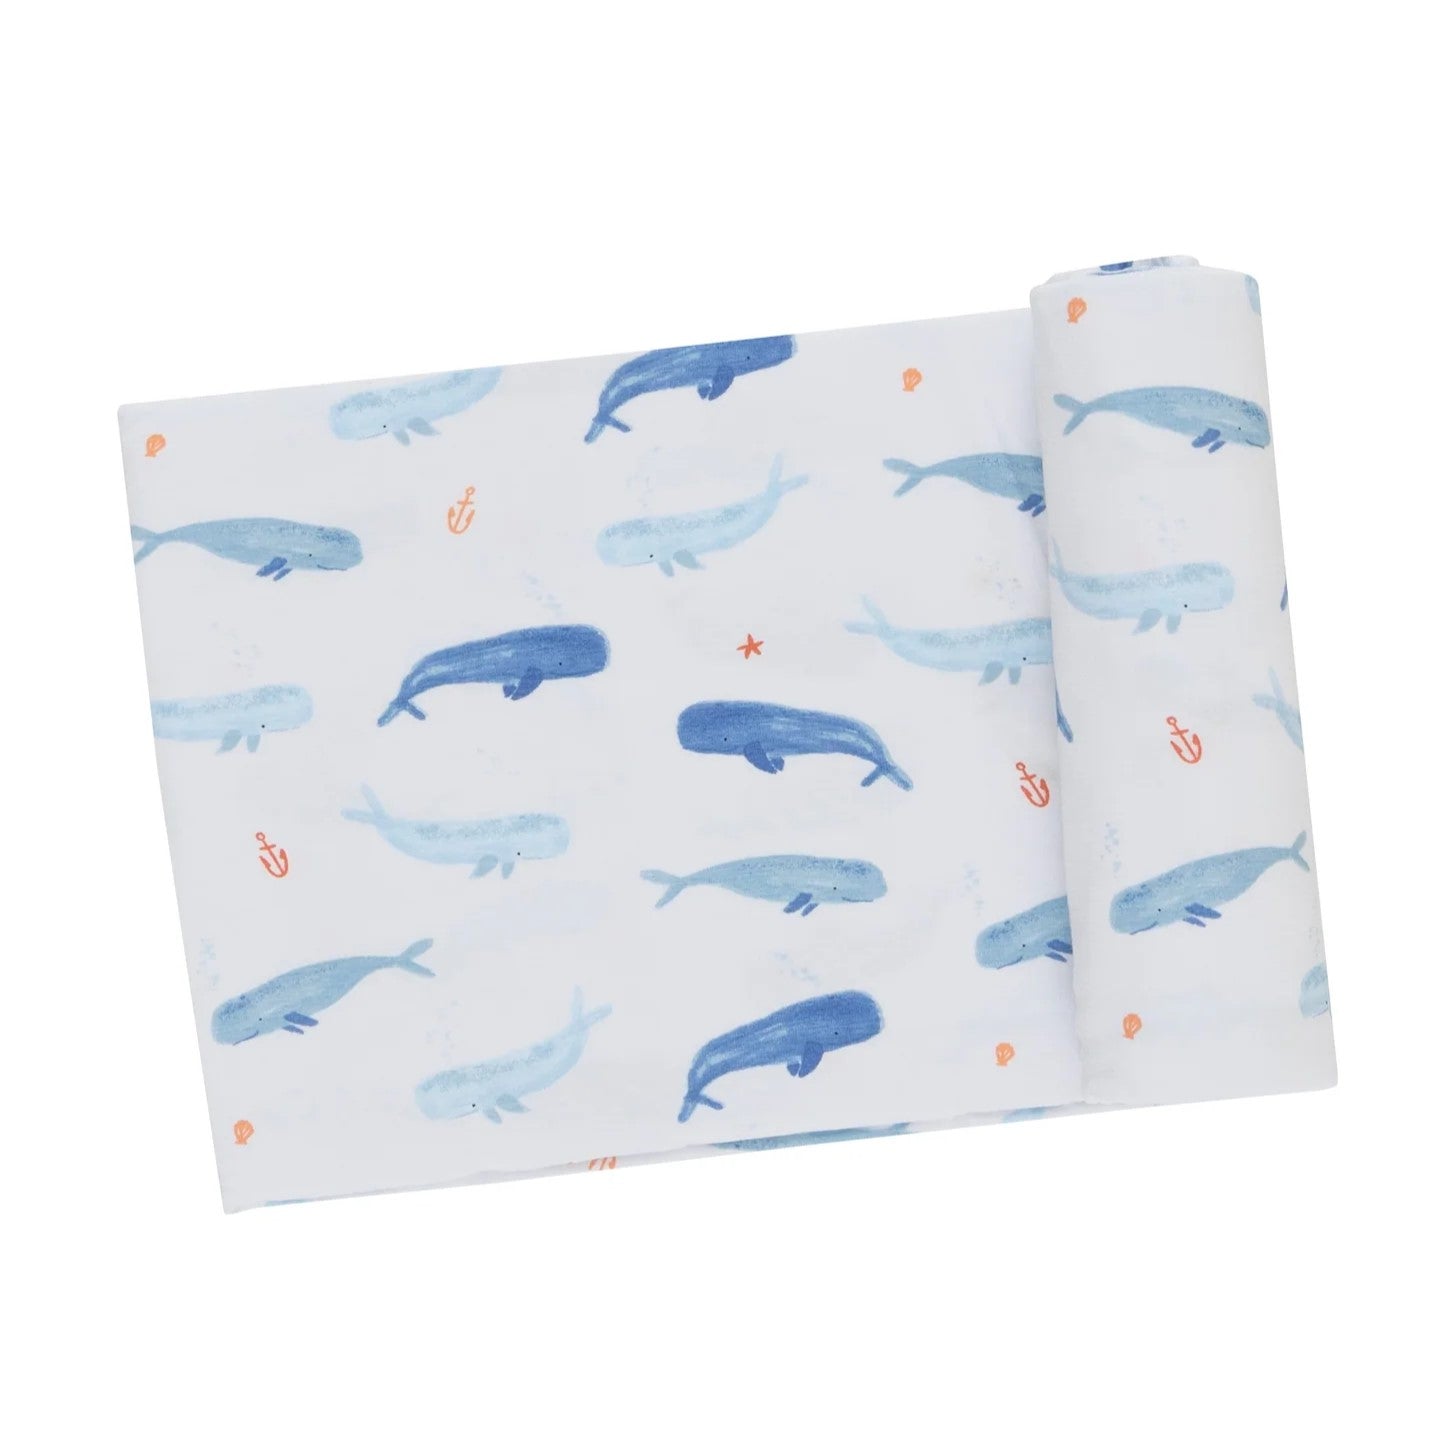 Whale Hello There Swaddle Blanket